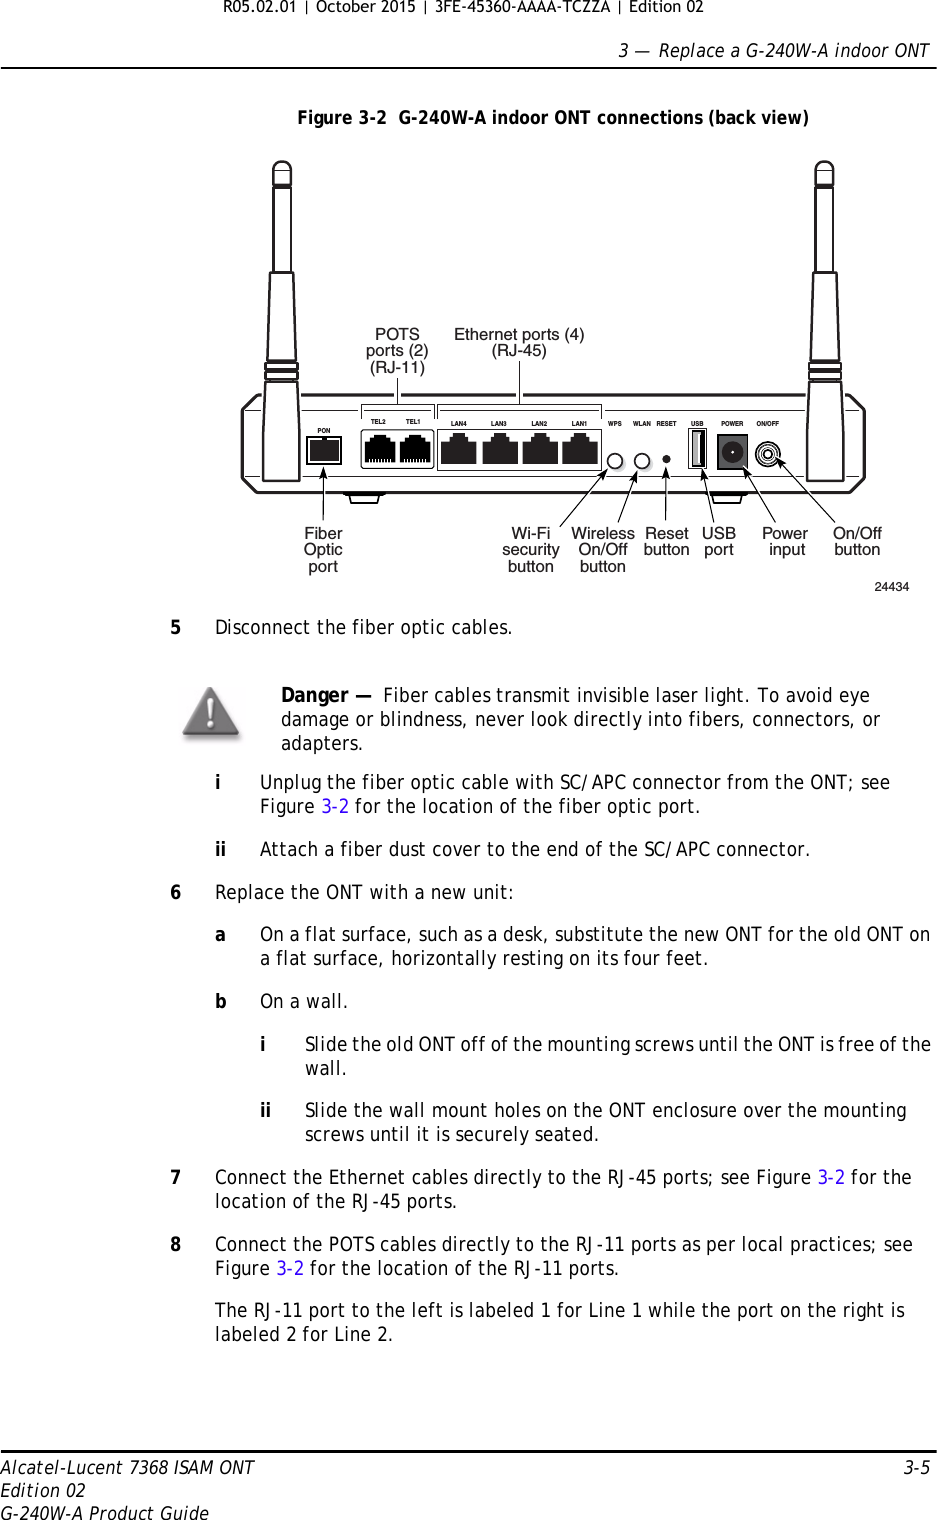 3 —  Replace a G-240W-A indoor ONTAlcatel-Lucent 7368 ISAM ONT 3-5Edition 02G-240W-A Product GuideFigure 3-2  G-240W-A indoor ONT connections (back view)5Disconnect the fiber optic cables.iUnplug the fiber optic cable with SC/APC connector from the ONT; see Figure 3-2 for the location of the fiber optic port.ii Attach a fiber dust cover to the end of the SC/APC connector.6Replace the ONT with a new unit:aOn a flat surface, such as a desk, substitute the new ONT for the old ONT on a flat surface, horizontally resting on its four feet.bOn a wall.iSlide the old ONT off of the mounting screws until the ONT is free of the wall.ii Slide the wall mount holes on the ONT enclosure over the mounting screws until it is securely seated.7Connect the Ethernet cables directly to the RJ-45 ports; see Figure 3-2 for the location of the RJ-45 ports.8Connect the POTS cables directly to the RJ-11 ports as per local practices; see Figure 3-2 for the location of the RJ-11 ports.The RJ-11 port to the left is labeled 1 for Line 1 while the port on the right is labeled 2 for Line 2.Danger —  Fiber cables transmit invisible laser light. To avoid eye damage or blindness, never look directly into fibers, connectors, or adapters.LAN4PONLAN3 LAN2 LAN1 WPS WLAN RESET USB POWER ON/OFFTEL2 TEL1Ethernet ports (4)(RJ-45)POTSports (2)(RJ-11)USBportResetbuttonWirelessOn/OffbuttonWi-FisecuritybuttonFiberOpticport24434On/OffbuttonPower input R05.02.01 | October 2015 | 3FE-45360-AAAA-TCZZA | Edition 02 